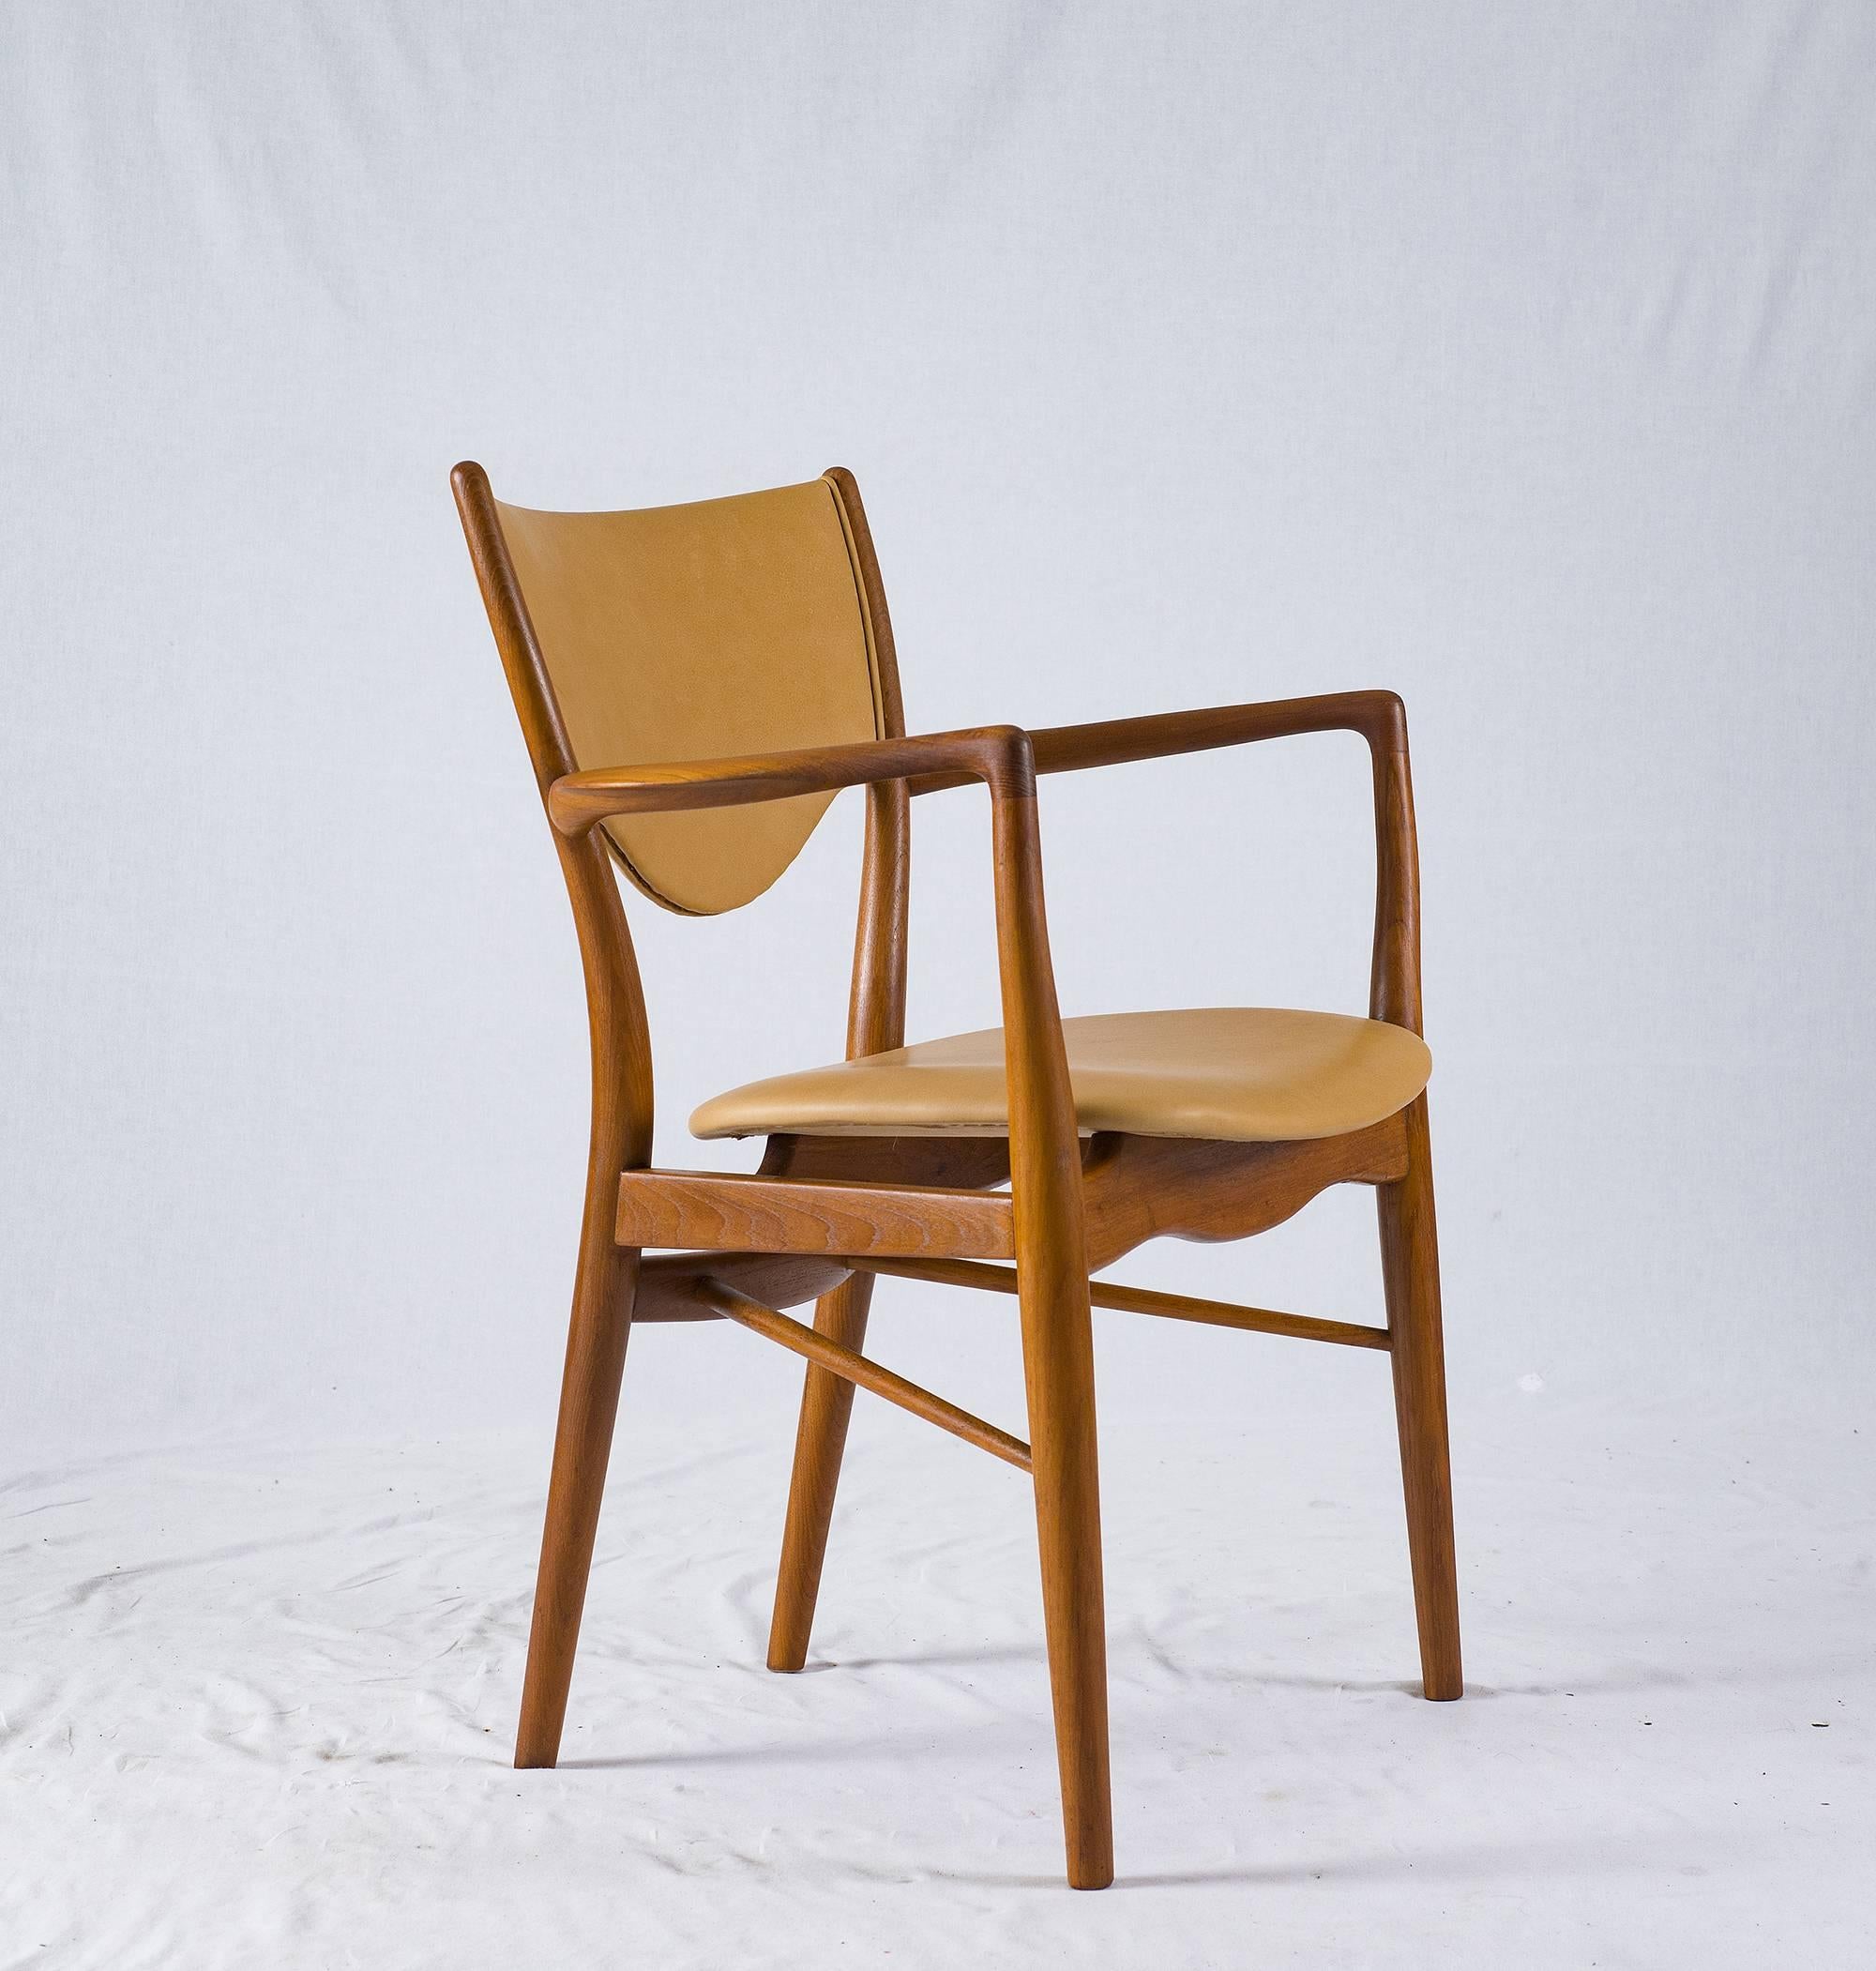 Pair of Finn Juhl BO-46 armchairs designed in 1953 and produced by Bovirke.